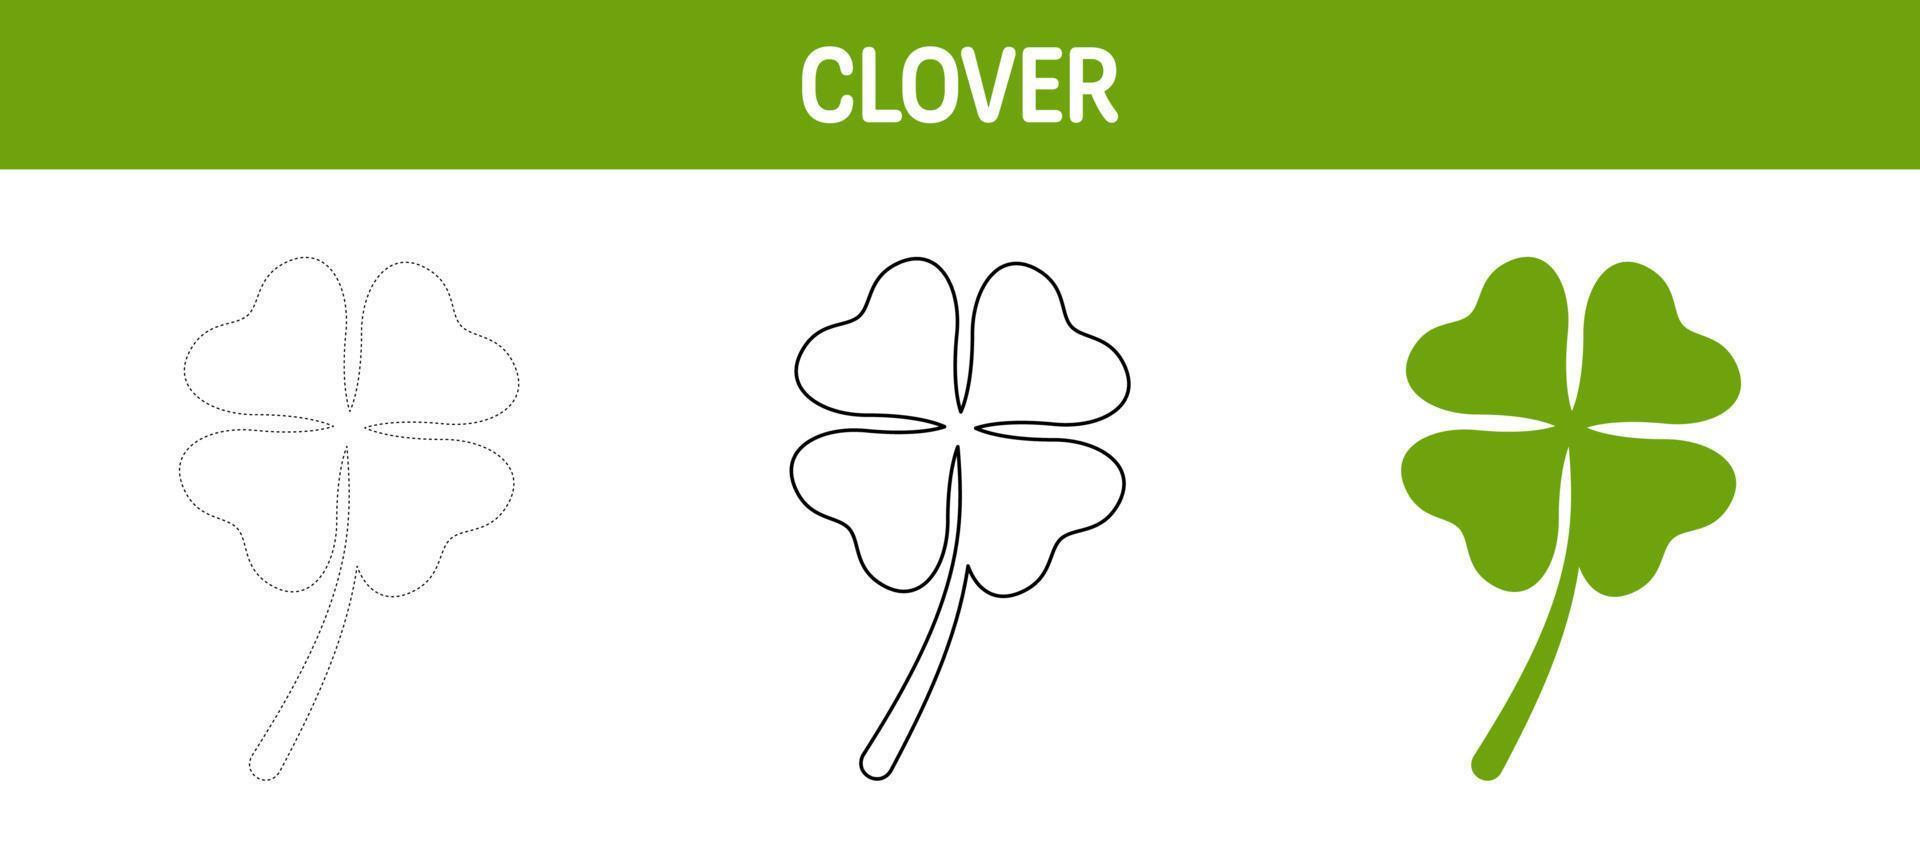 Clover Leaf tracing and coloring worksheet for kids vector